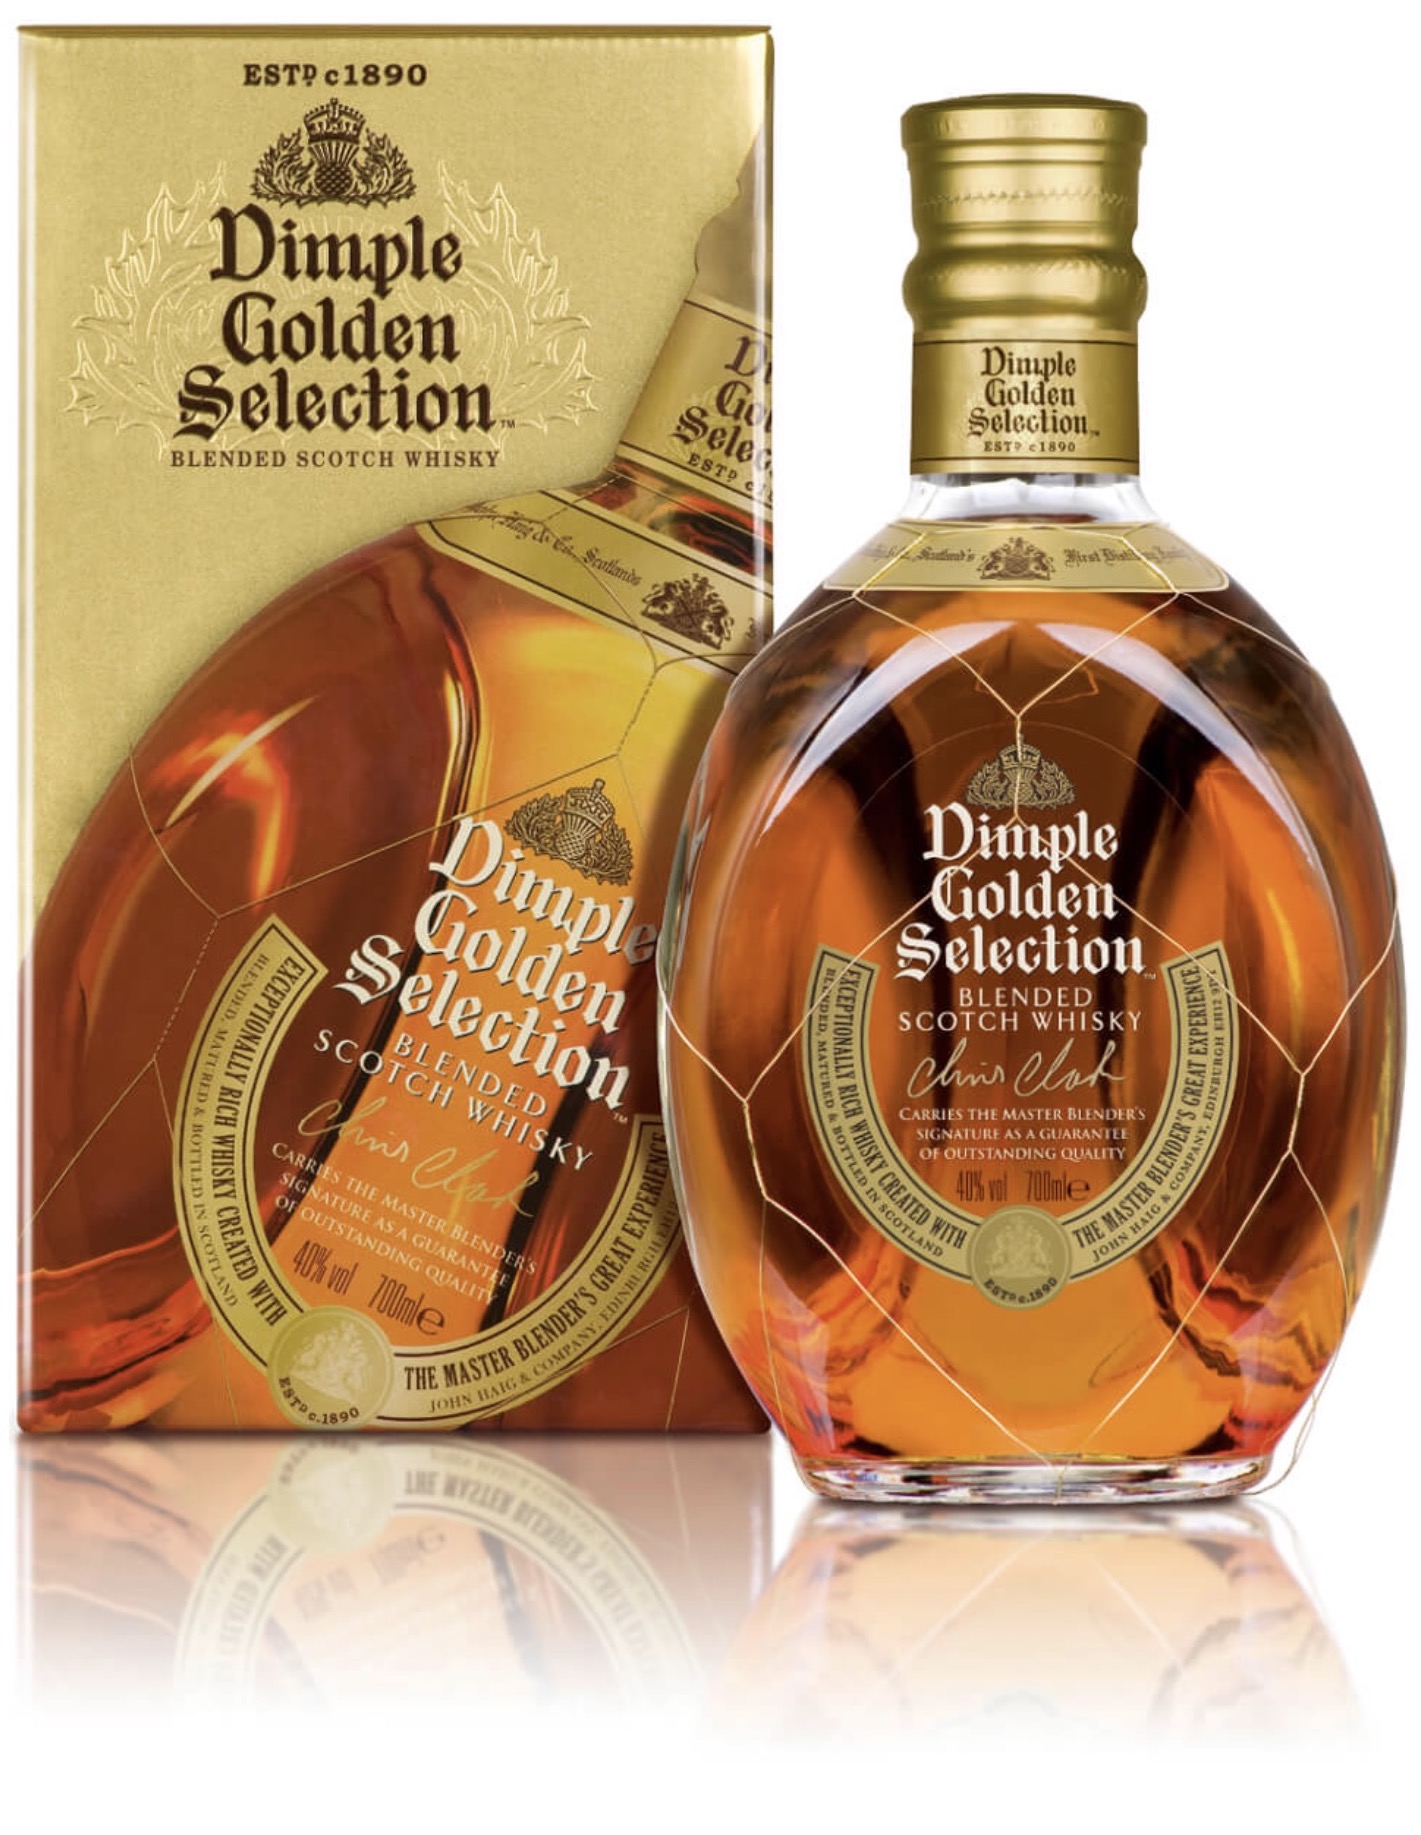 Dimple Gold Selection blended Scotch Whisky GP 40% 0,7L